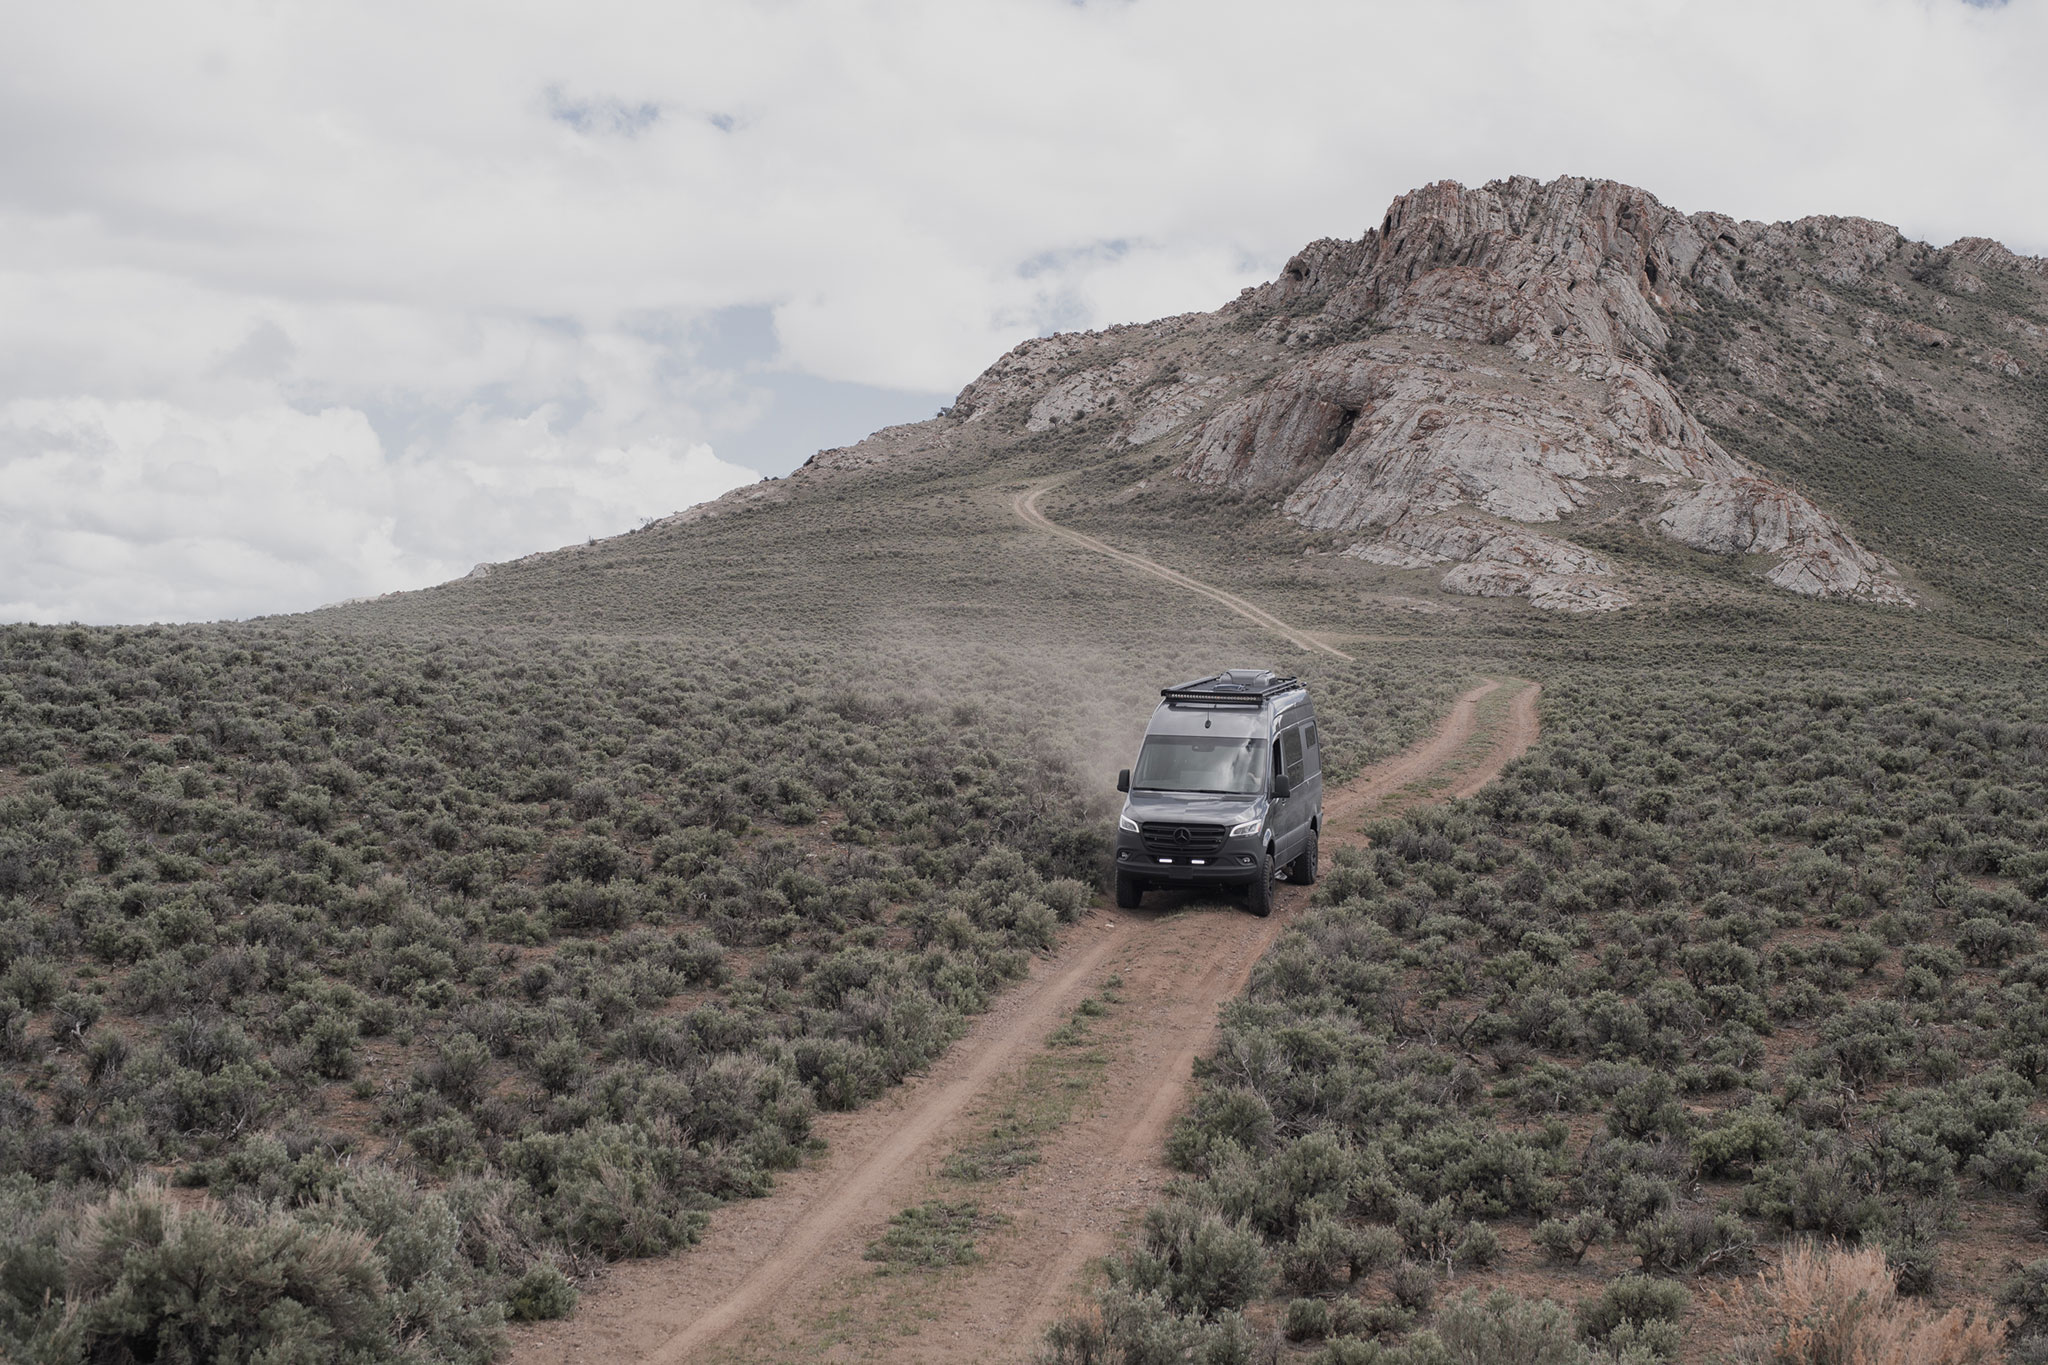 A customized Sprinter van drives down a dirt trail with a rocky outcropping in the distance behind it.